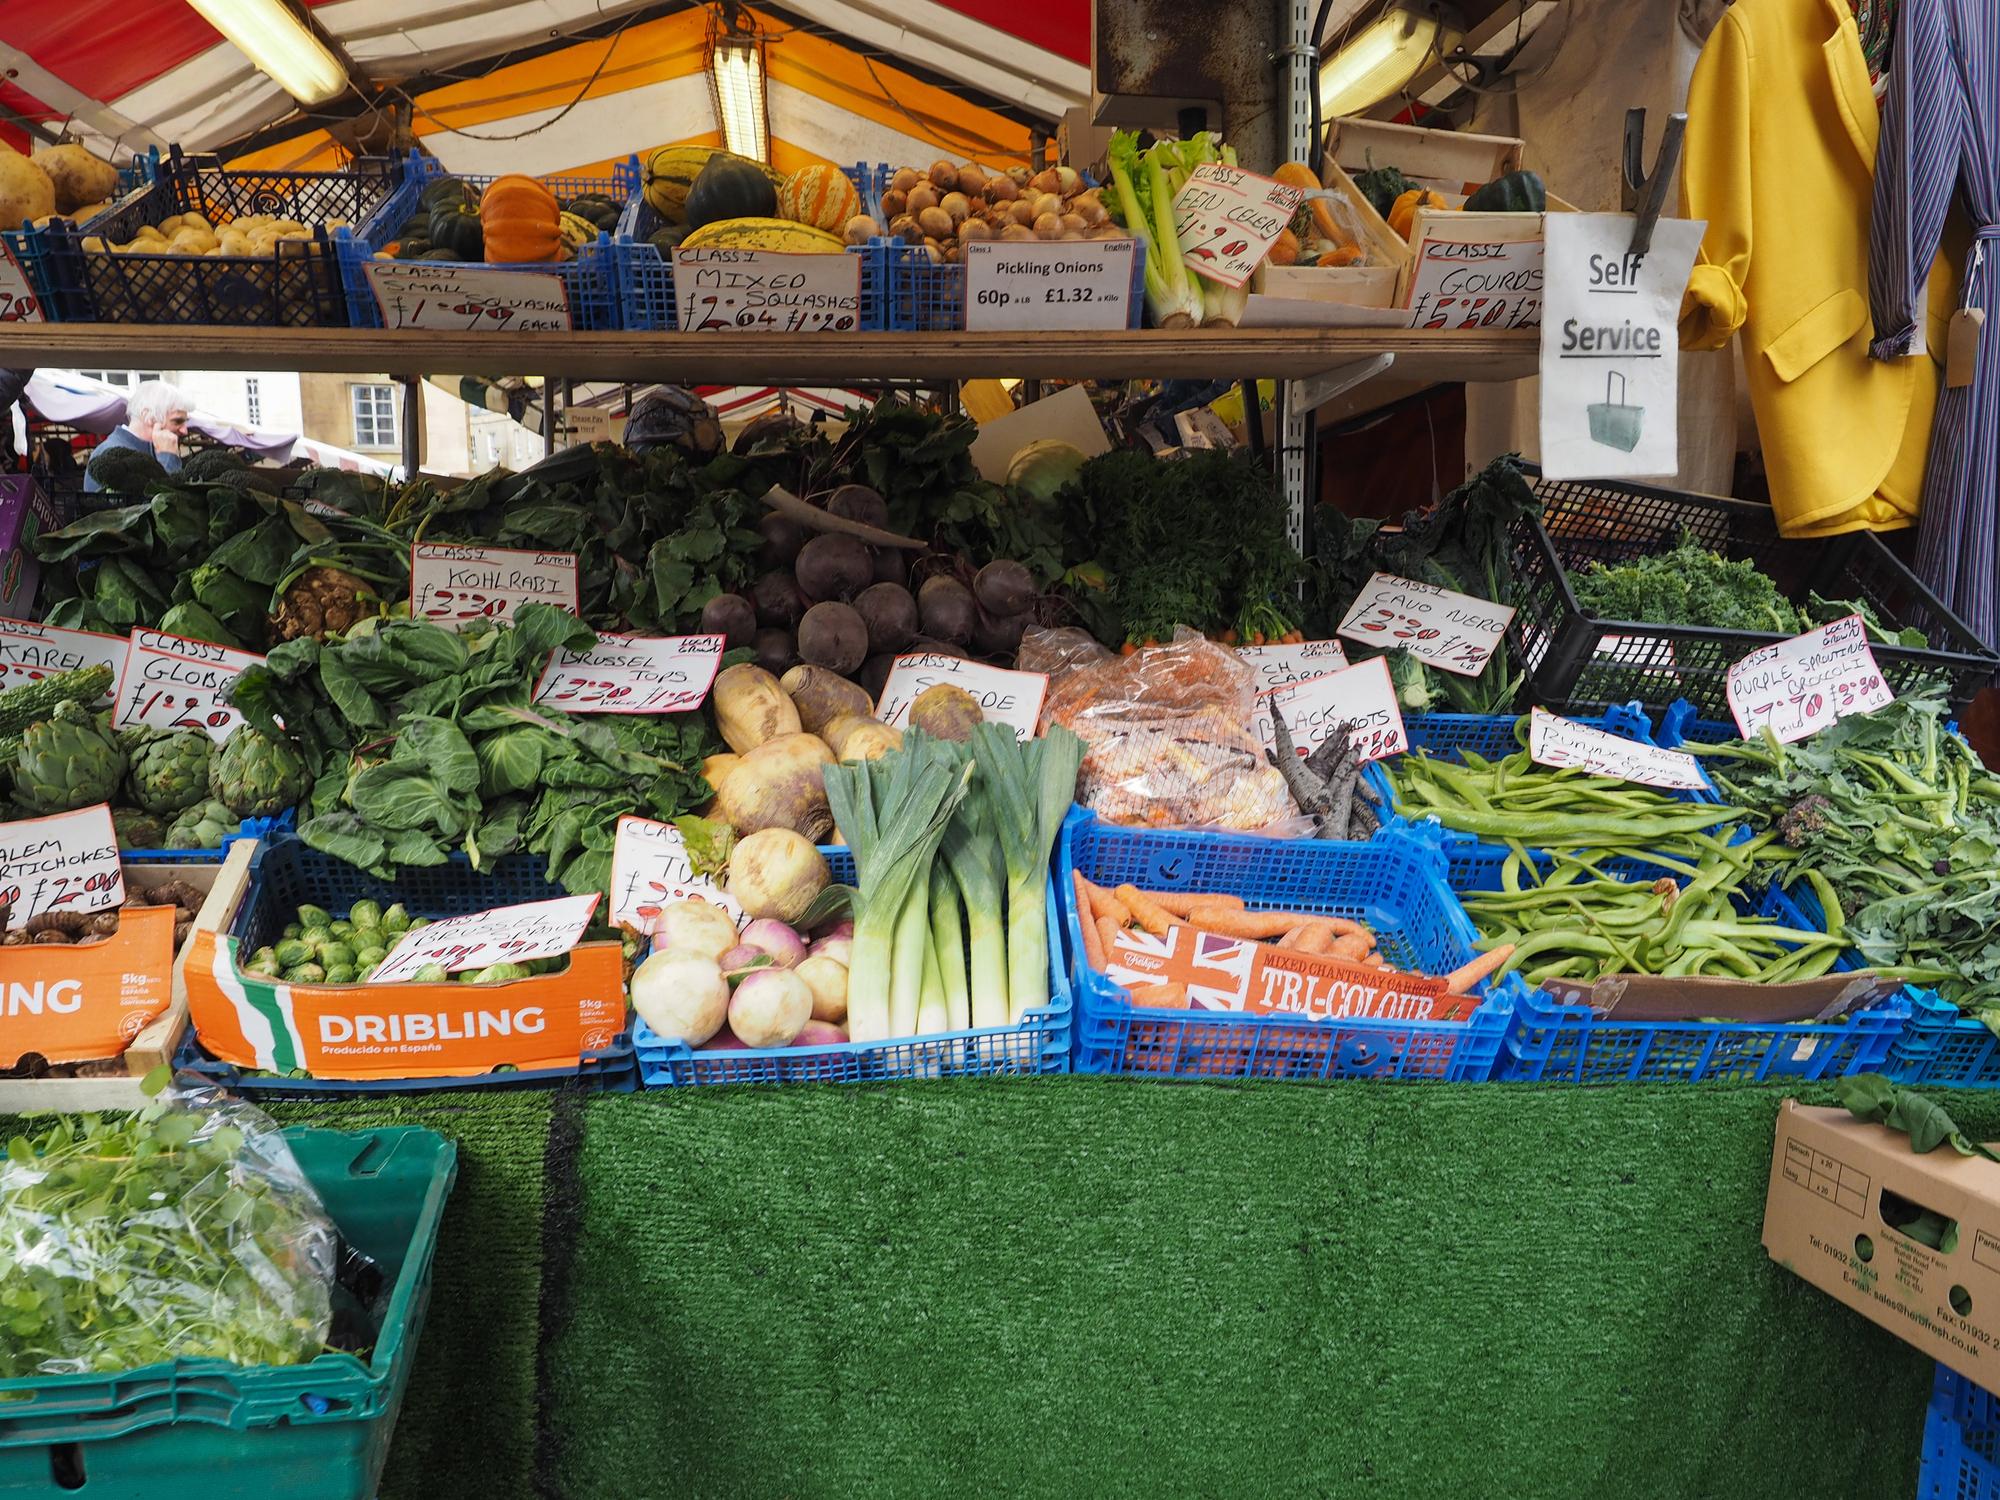 Market stall with vegetables